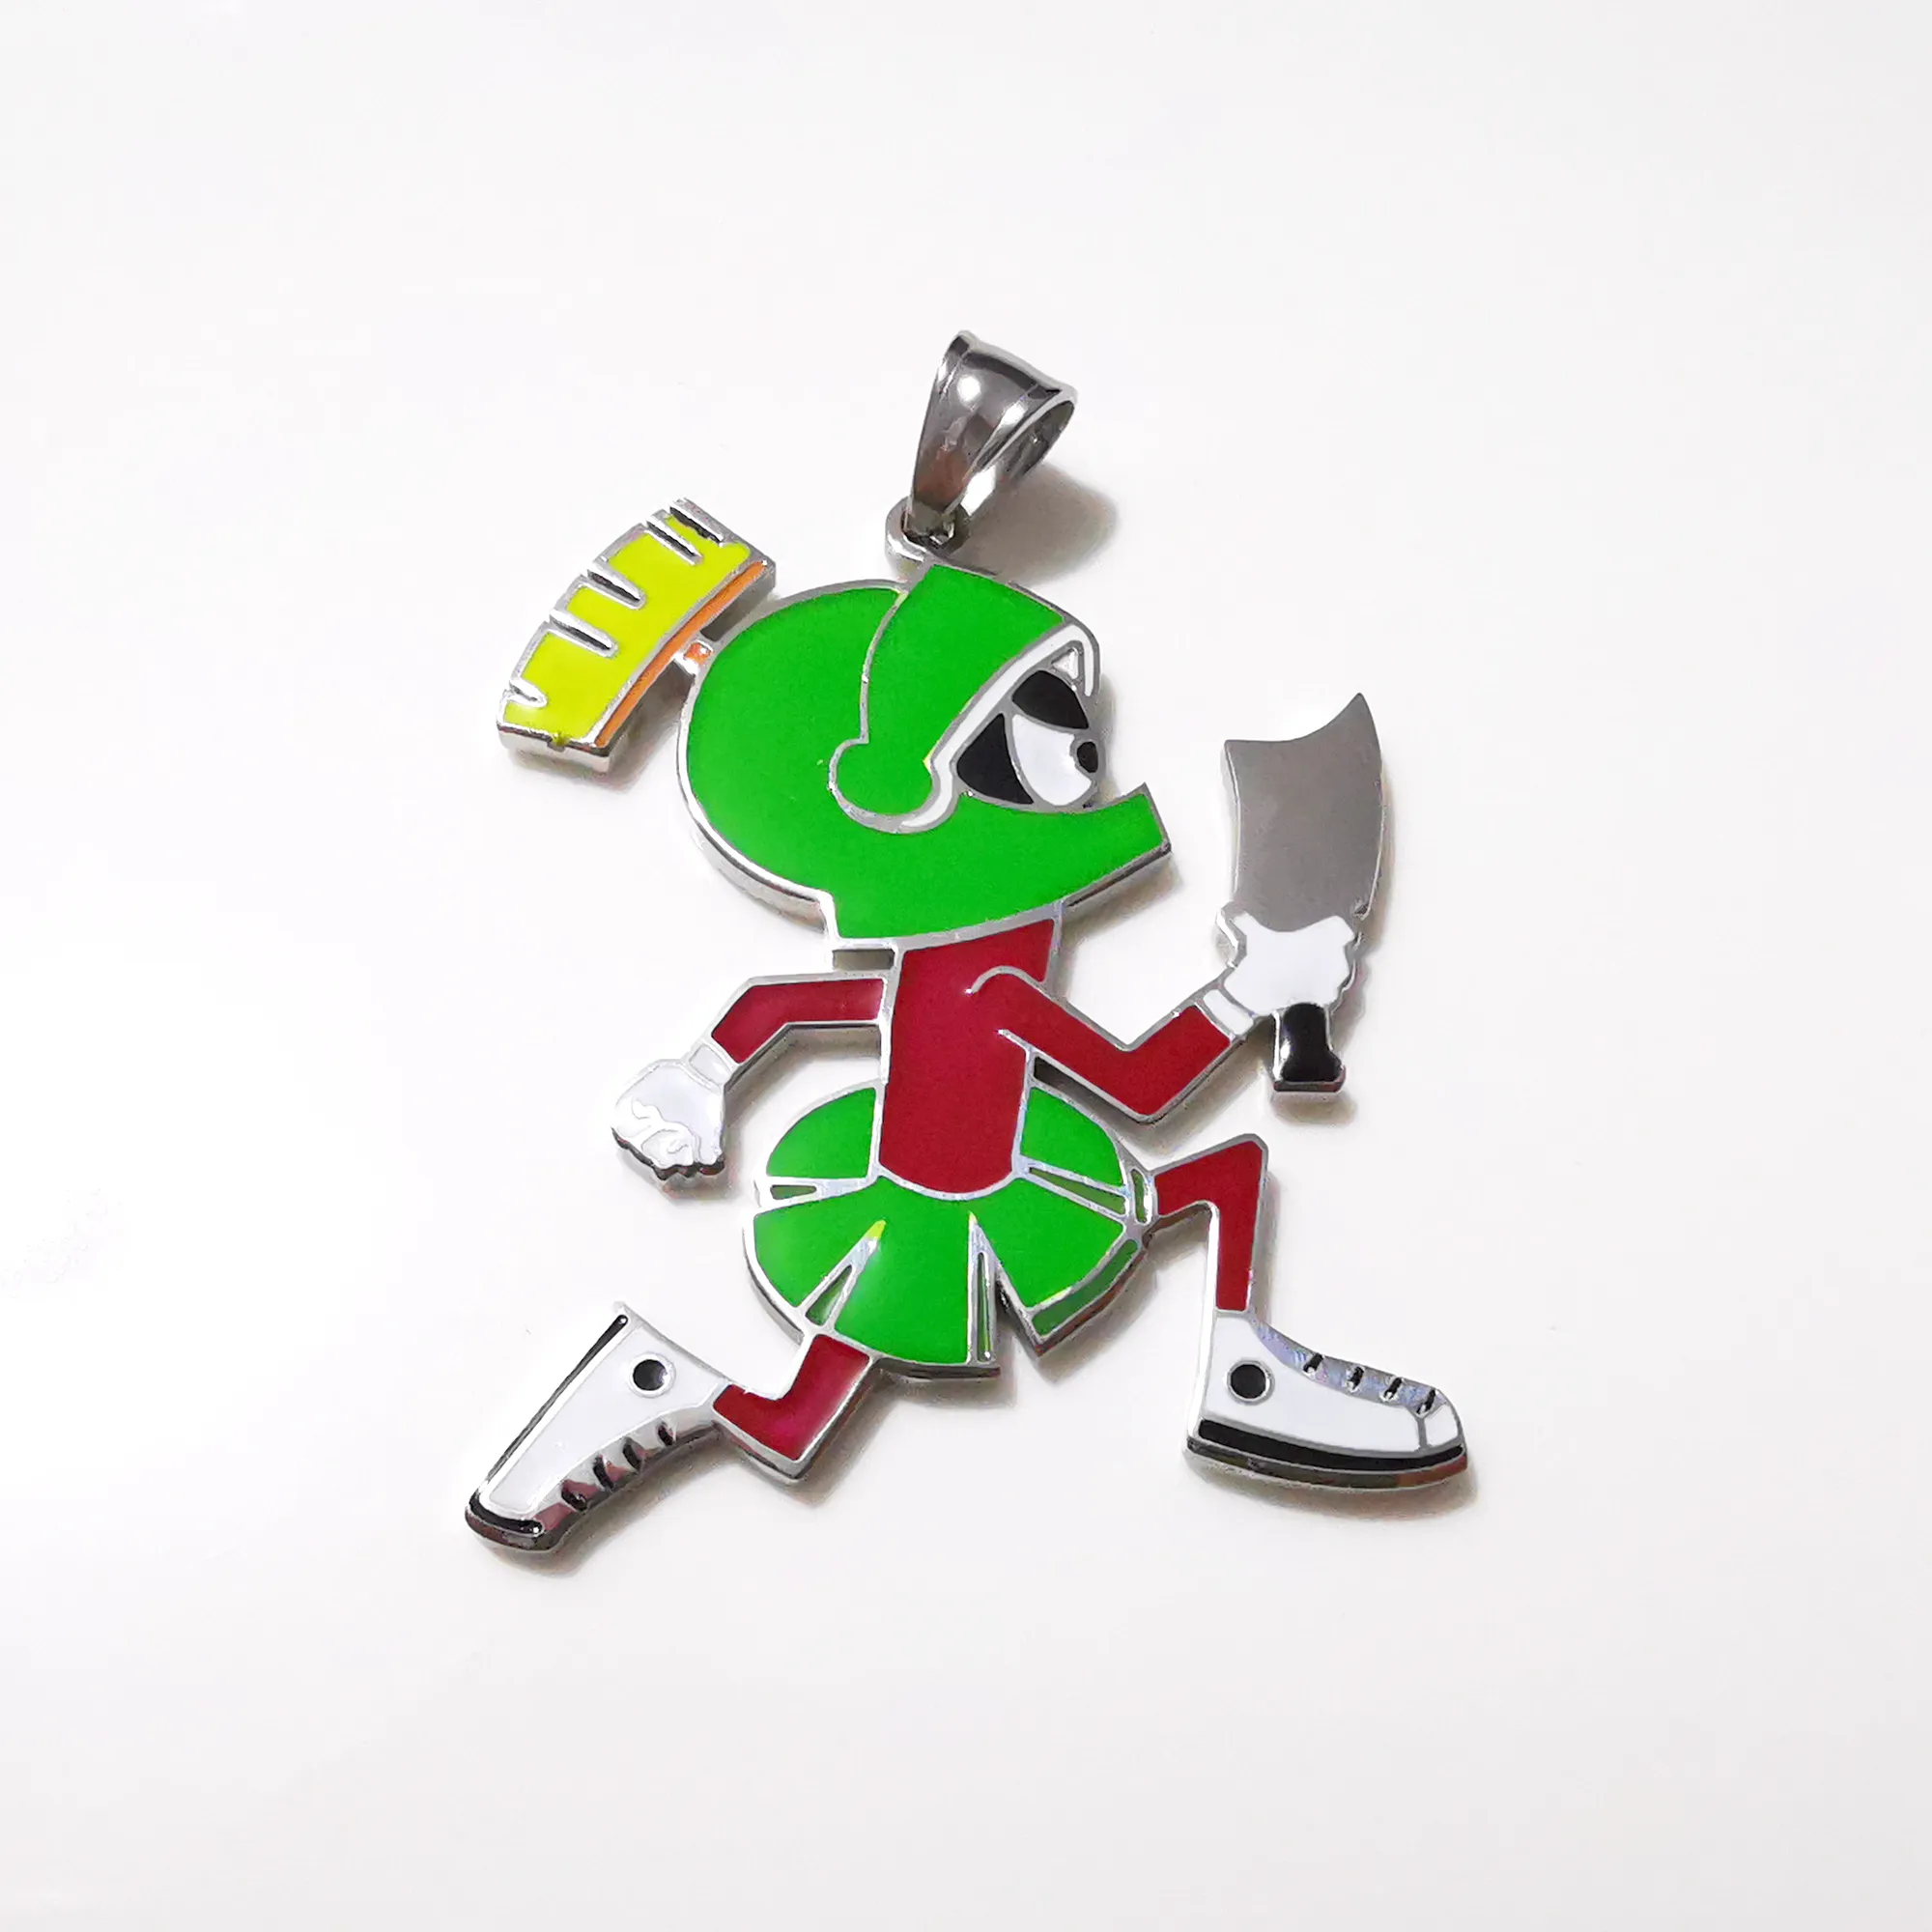 XMAS Gifts Mens Pendant Green Color 2 inch Juggalo Marvin the Martian Stainless steel ICP Hatchetman Necklace Chain252w